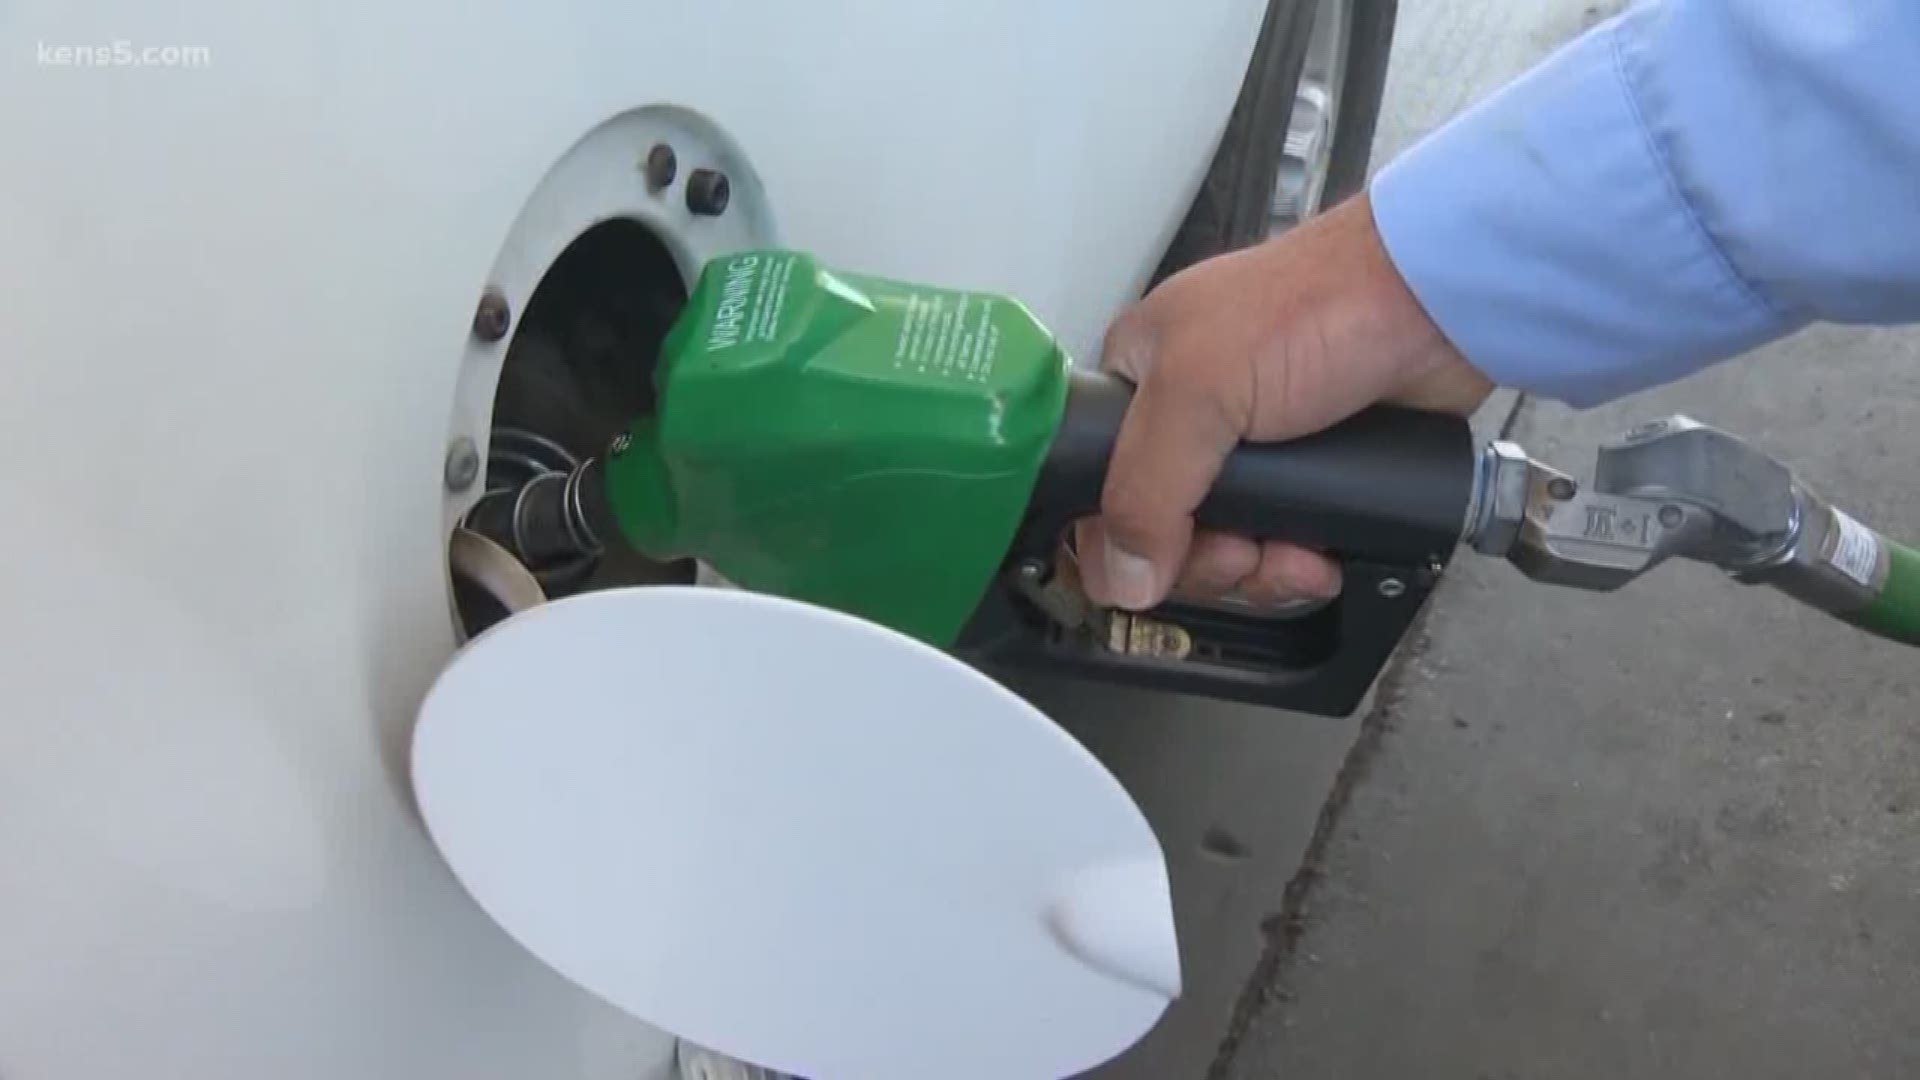 The average price for a gallon of gas in Texas is $2.70, according to AAA.